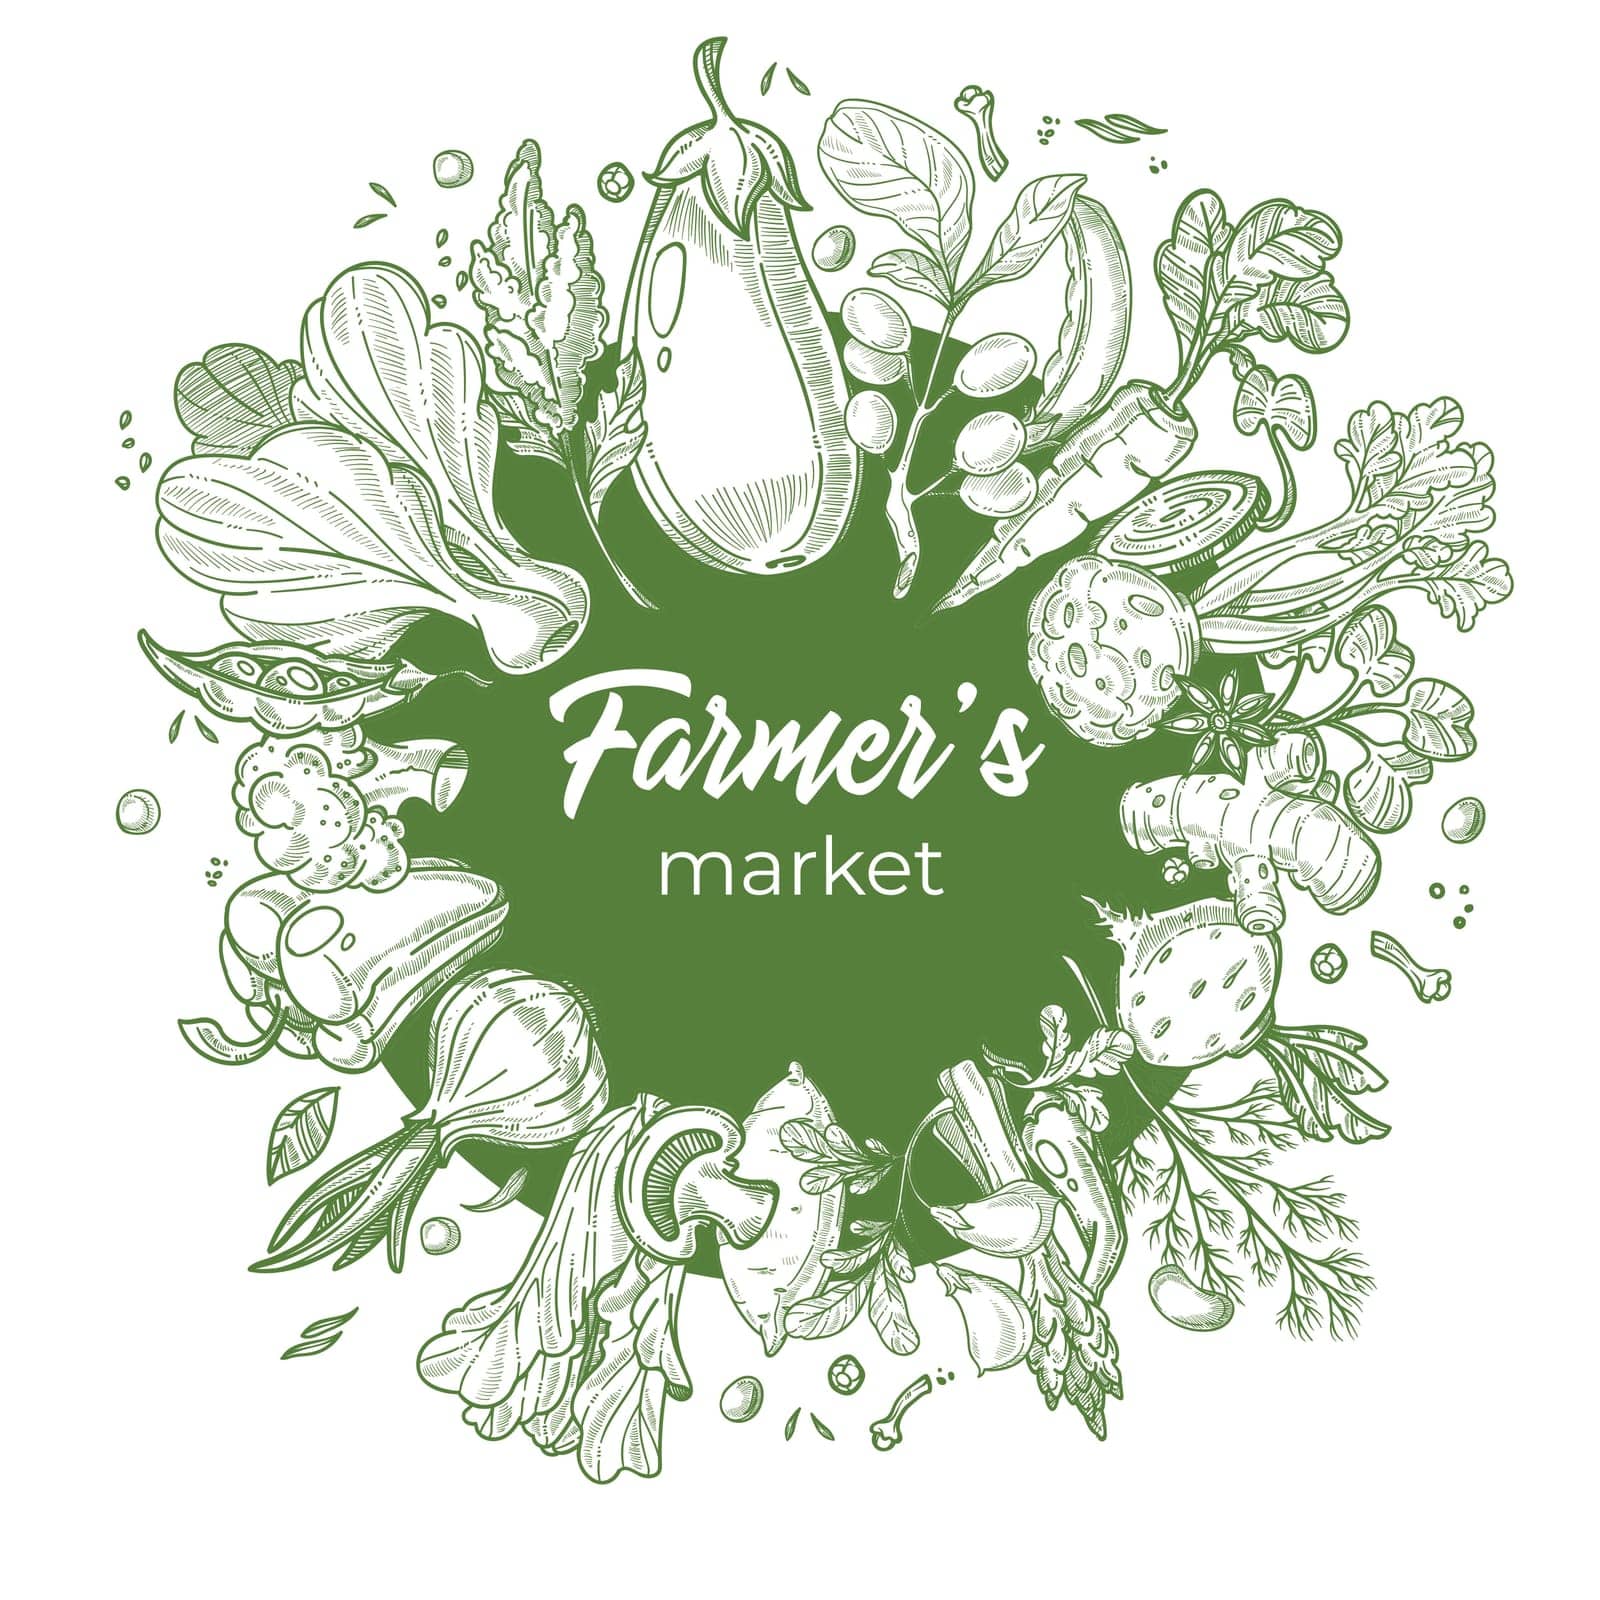 Emblem or logotype for farmers market assortment of vegetables and fruits. Eggplant and onion, carrot and bell pepper, mushroom and celery root, ginger and spices. Emblem vector in flat style